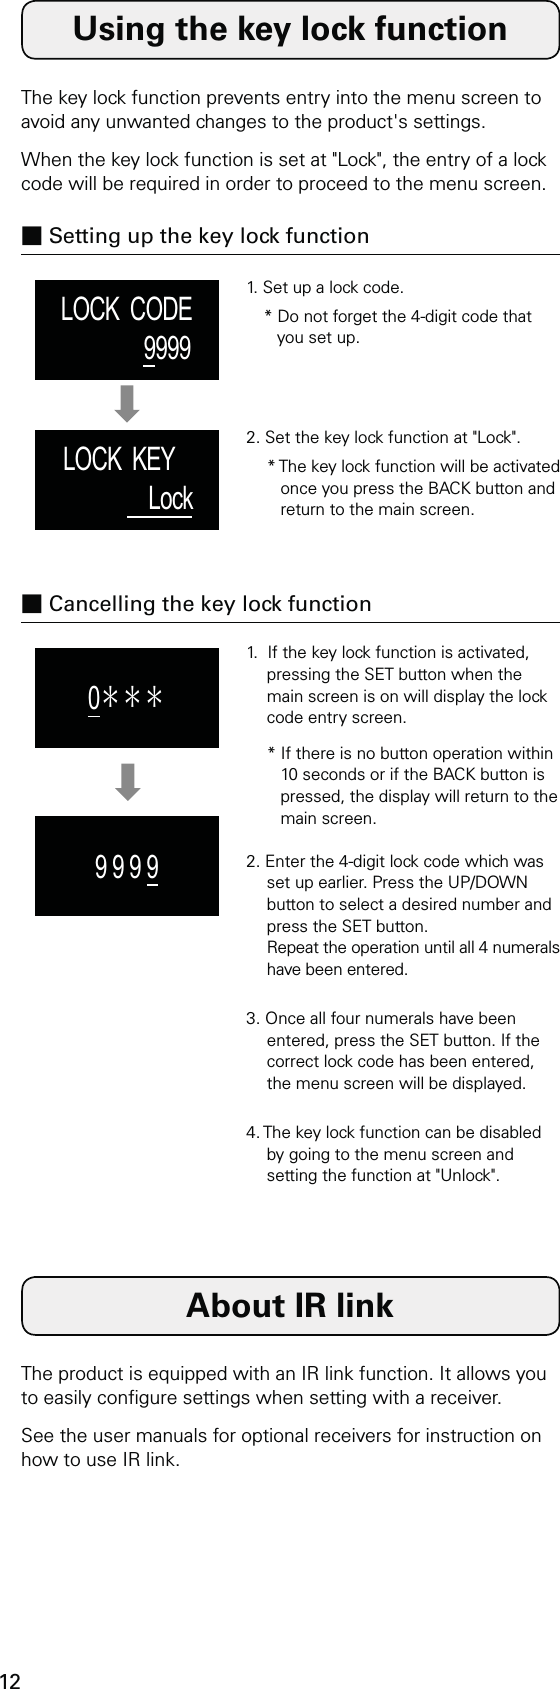 12LOCK  CODE9999LOCK  KEY     Lock0＊＊＊9 9 9 9Using the key lock functionAbout IR linkThe key lock function prevents entry into the menu screen to avoid any unwanted changes to the product&apos;s settings.When the key lock function is set at &quot;Lock&quot;, the entry of a lock code will be required in order to proceed to the menu screen.The product is equipped with an IR link function. It allows you to easily congure settings when setting with a receiver.See the user manuals for optional receivers for instruction on how to use IR link.■ Setting up the key lock function■ Cancelling the key lock function1. Set up a lock code.* Do not forget the 4-digit code that you set up.1.  If the key lock function is activated, pressing the SET button when the main screen is on will display the lock code entry screen.* If there is no button operation within 10 seconds or if the BACK button is pressed, the display will return to the main screen.2. Enter the 4-digit lock code which was set up earlier. Press the UP/DOWN button to select a desired number and press the SET button. Repeat the operation until all 4 numerals have been entered.3. Once all four numerals have been entered, press the SET button. If the correct lock code has been entered, the menu screen will be displayed.4. The key lock function can be disabled by going to the menu screen and setting the function at &quot;Unlock&quot;.2. Set the key lock function at &quot;Lock&quot;.* The key lock function will be activated once you press the BACK button and return to the main screen.